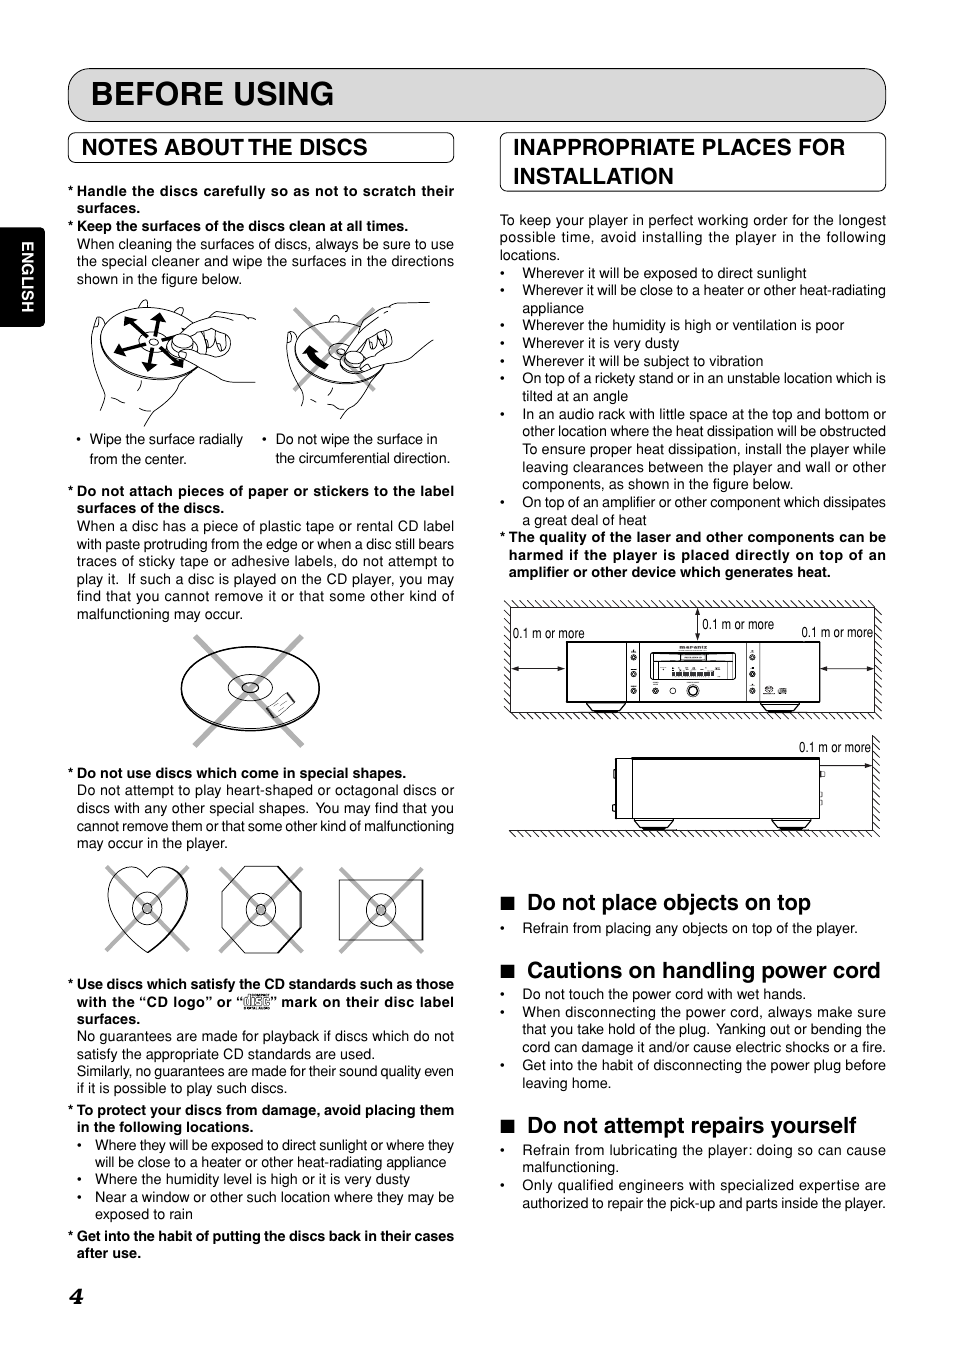 Before using, Inappropriate places for installation, 7 do not place objects on top | 7 cautions on handling power cord, 7 do not attempt repairs yourself | Marantz SA-11S1 User Manual | Page 9 / 29